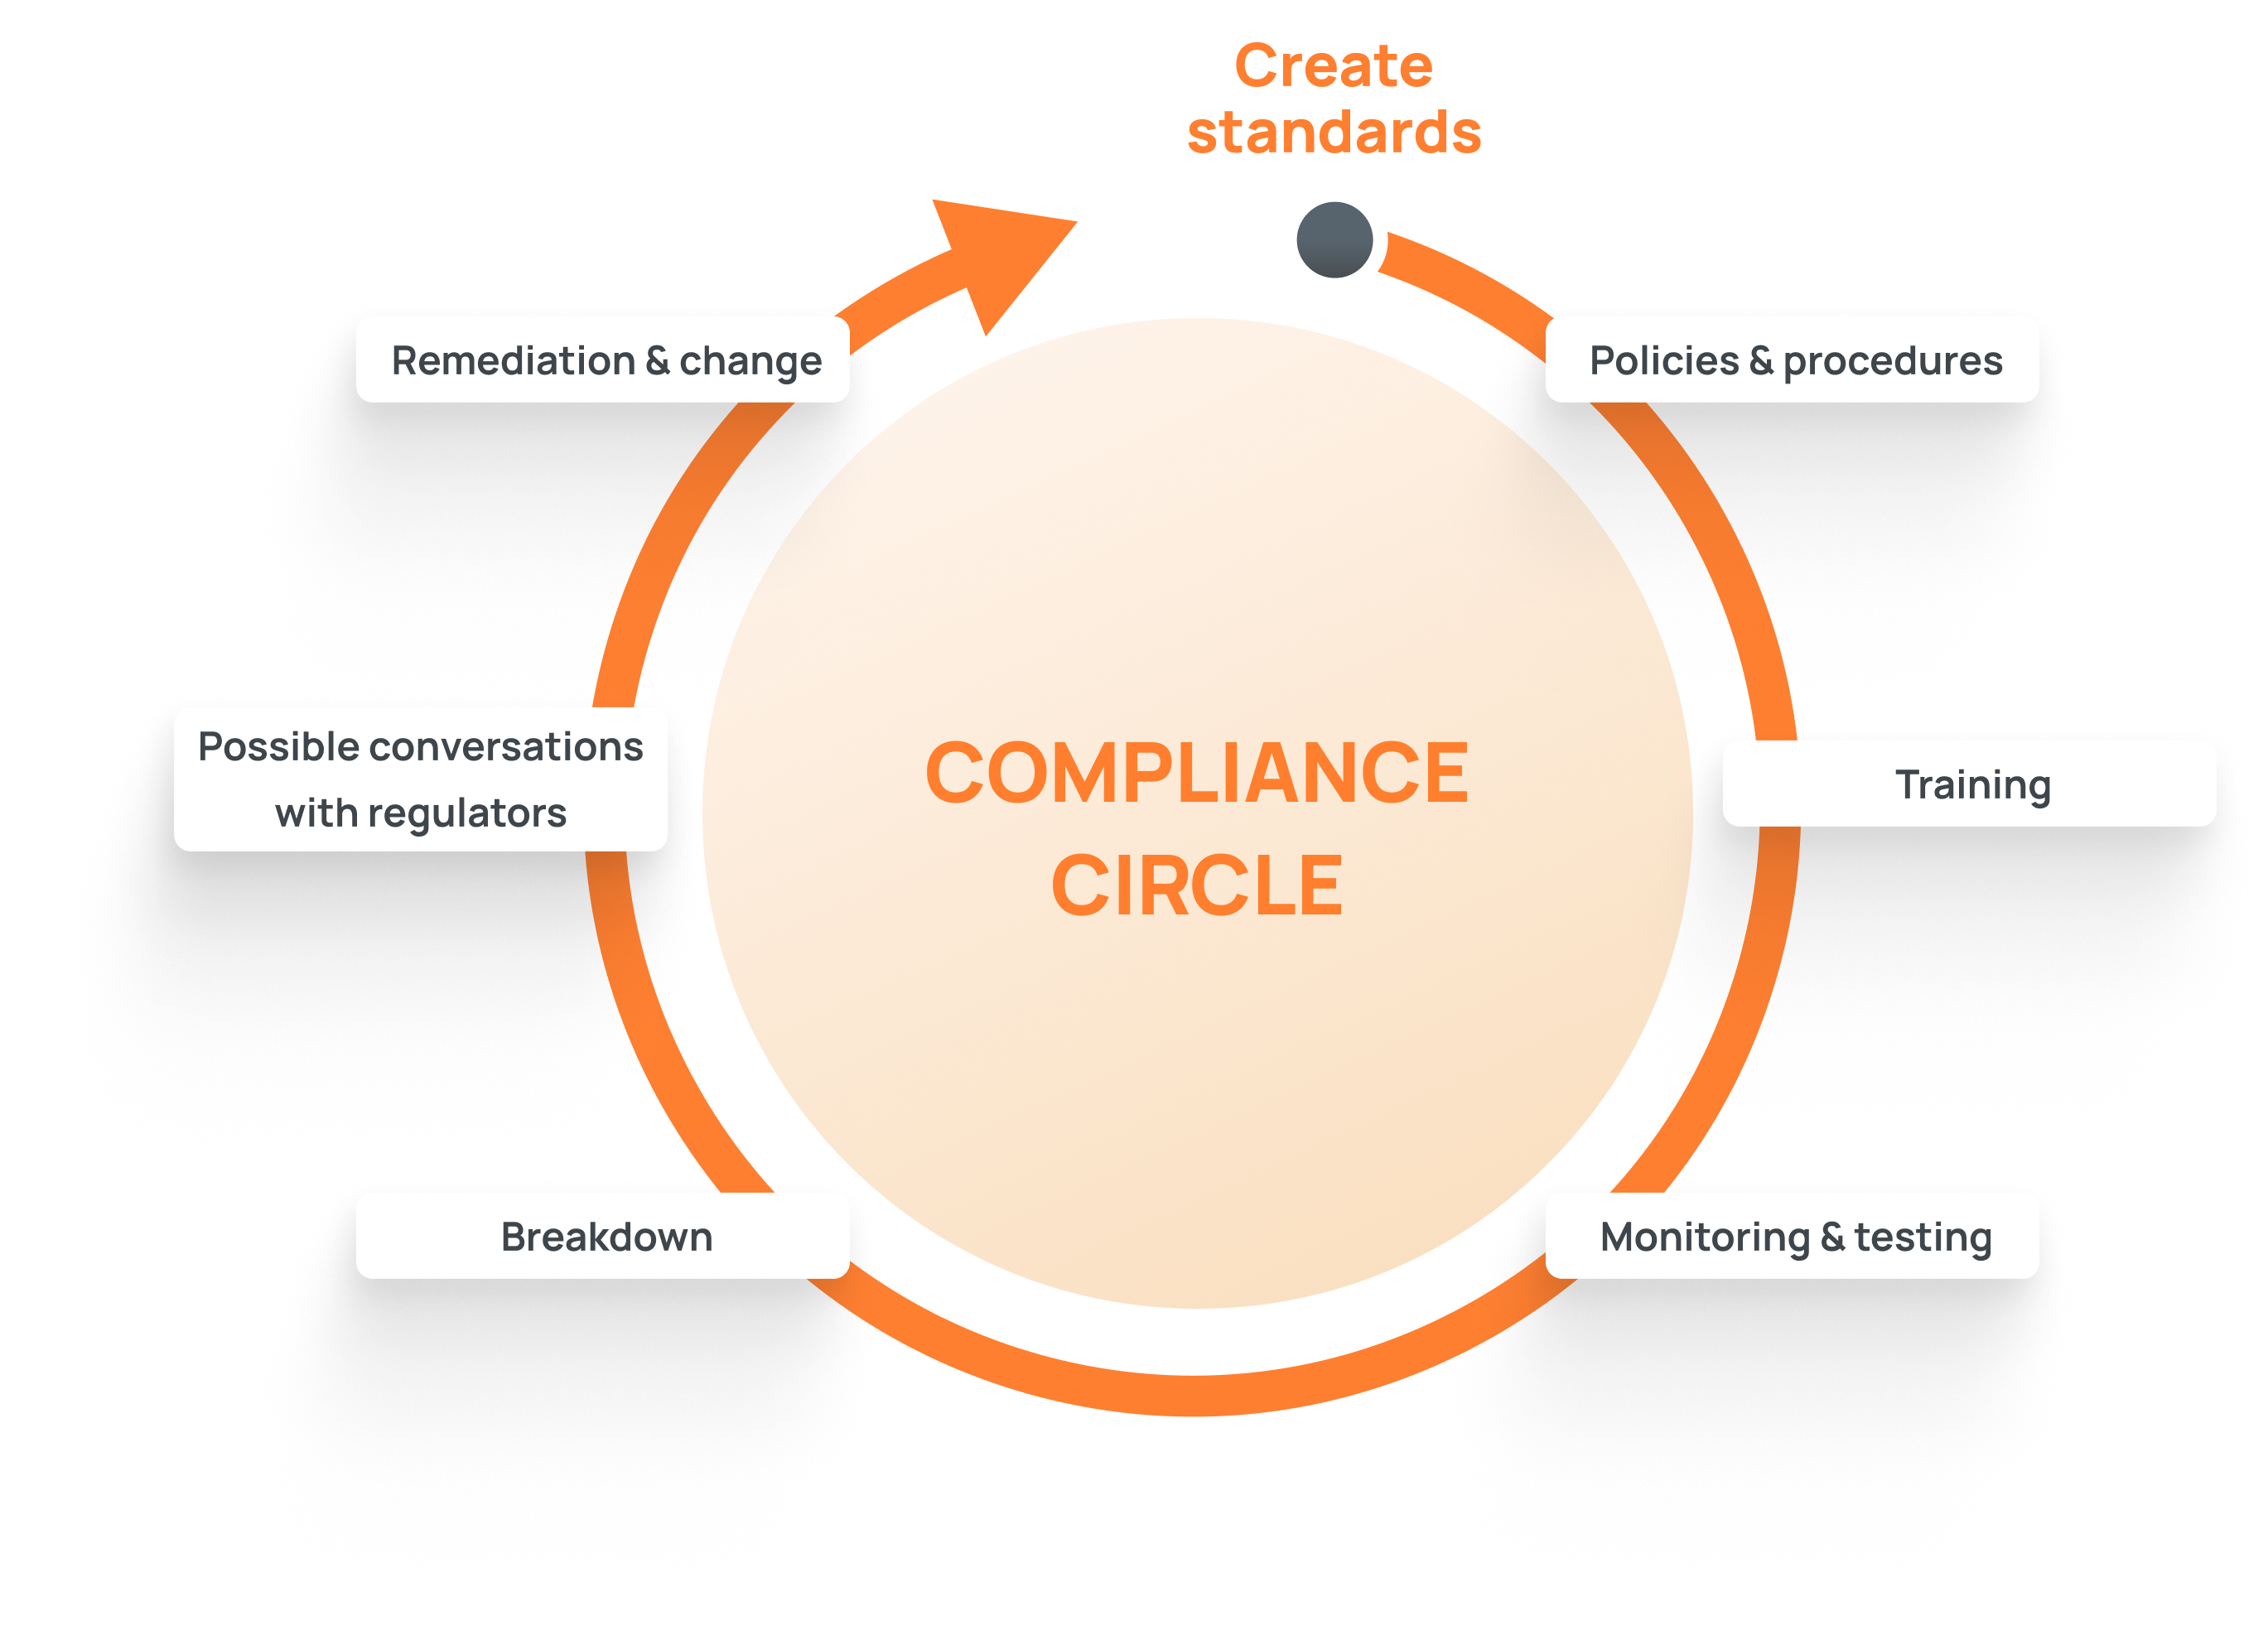 Diagram showing the circle of compliance when you start with creating standards: policies & procedures, training, monitoring & testing, breakdown, possible conversations with regulators, remediation & change.